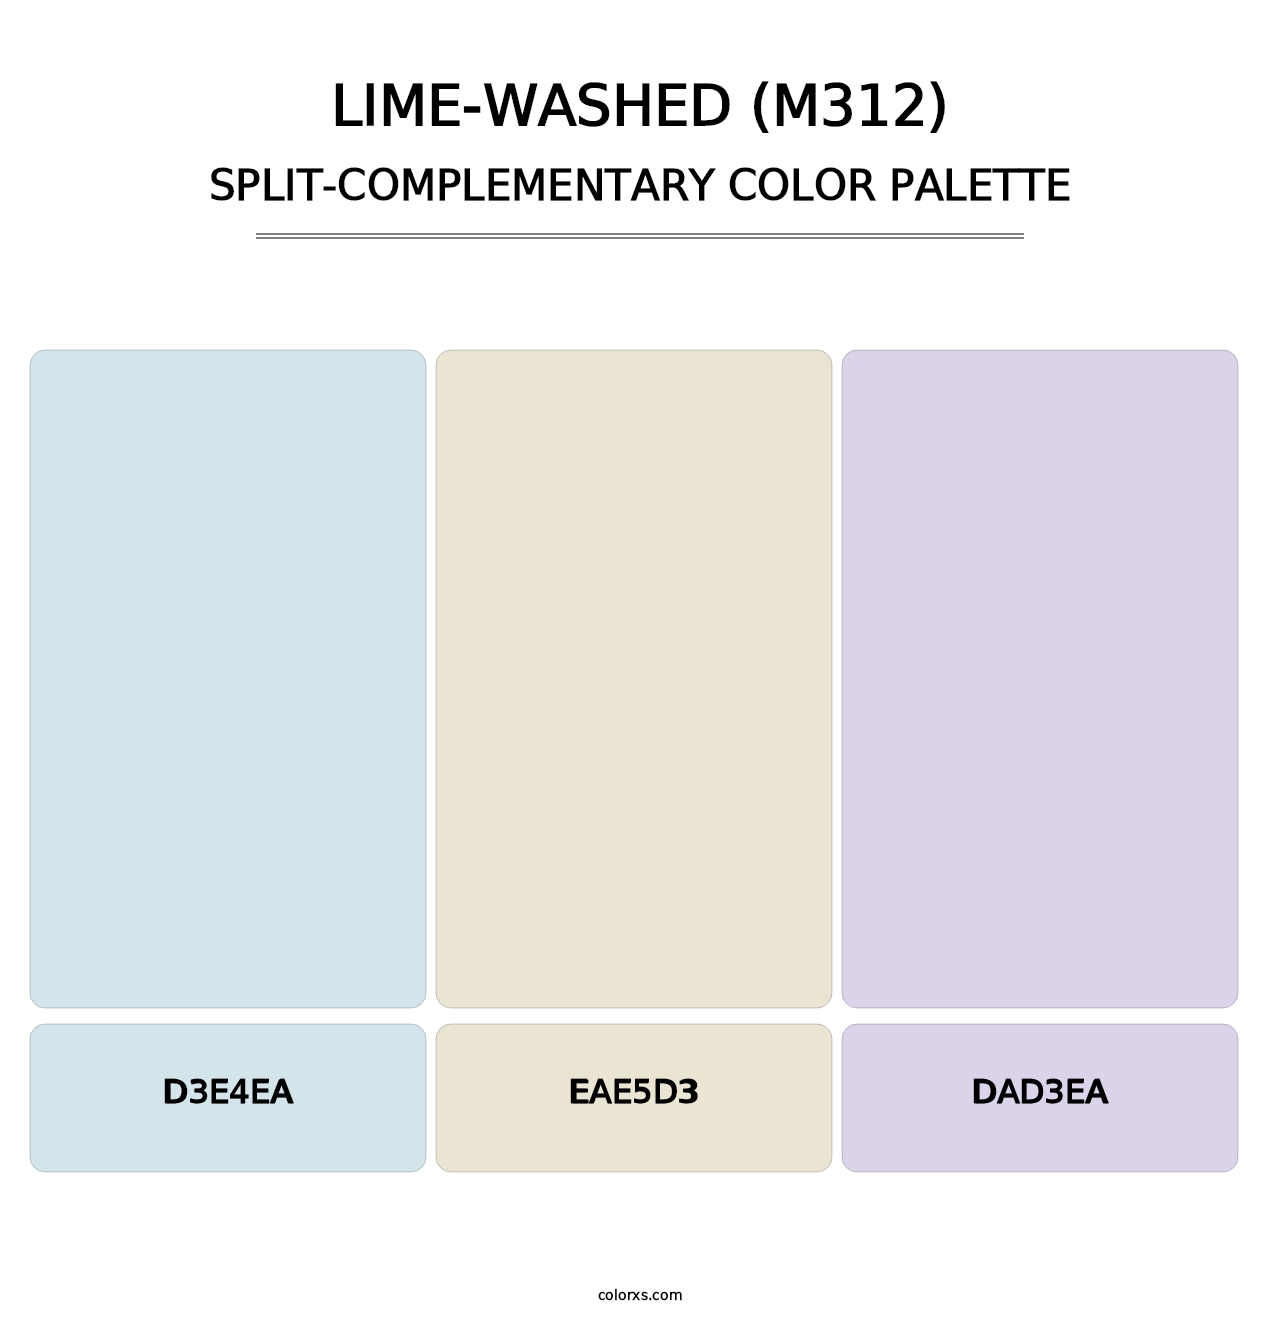 Lime-Washed (M312) - Split-Complementary Color Palette